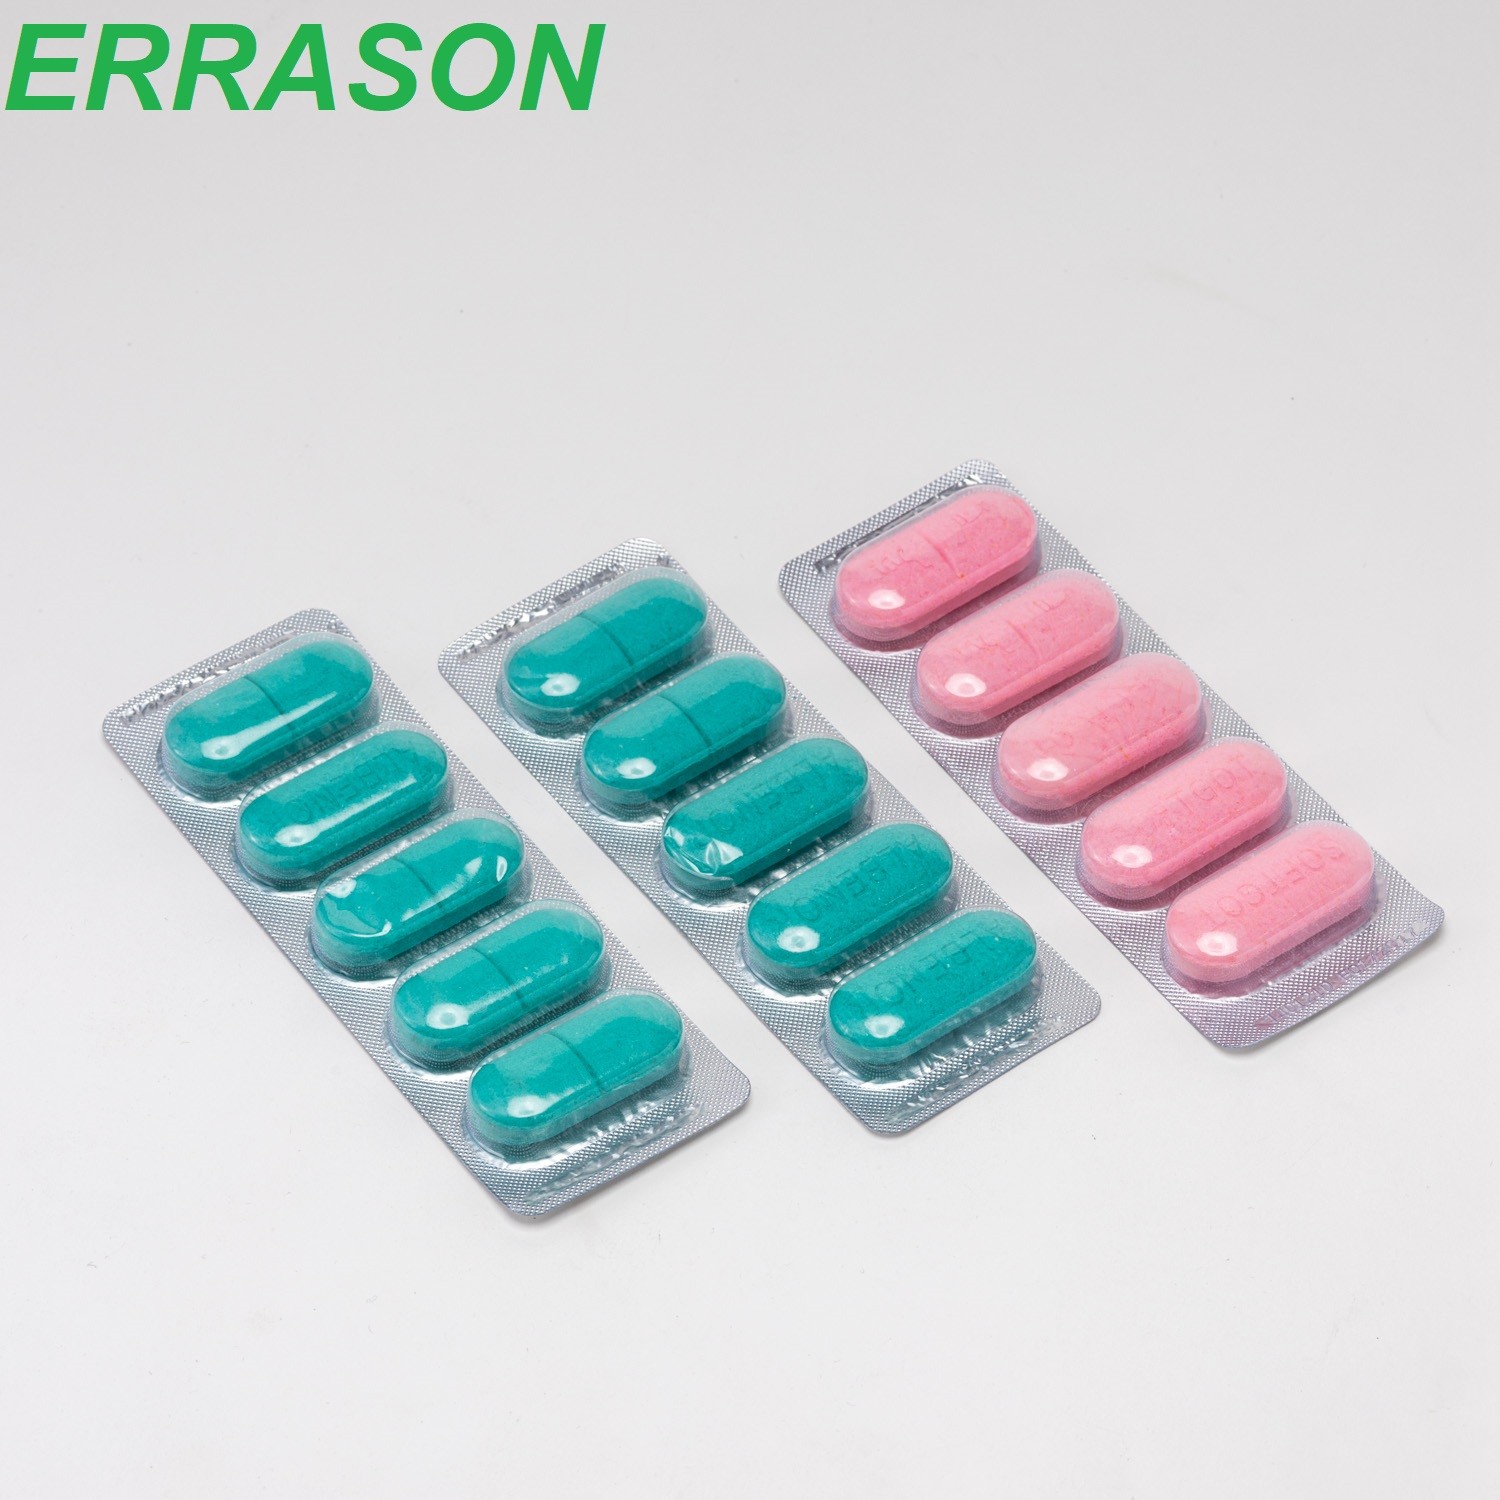 Abendazole tablet 600mg